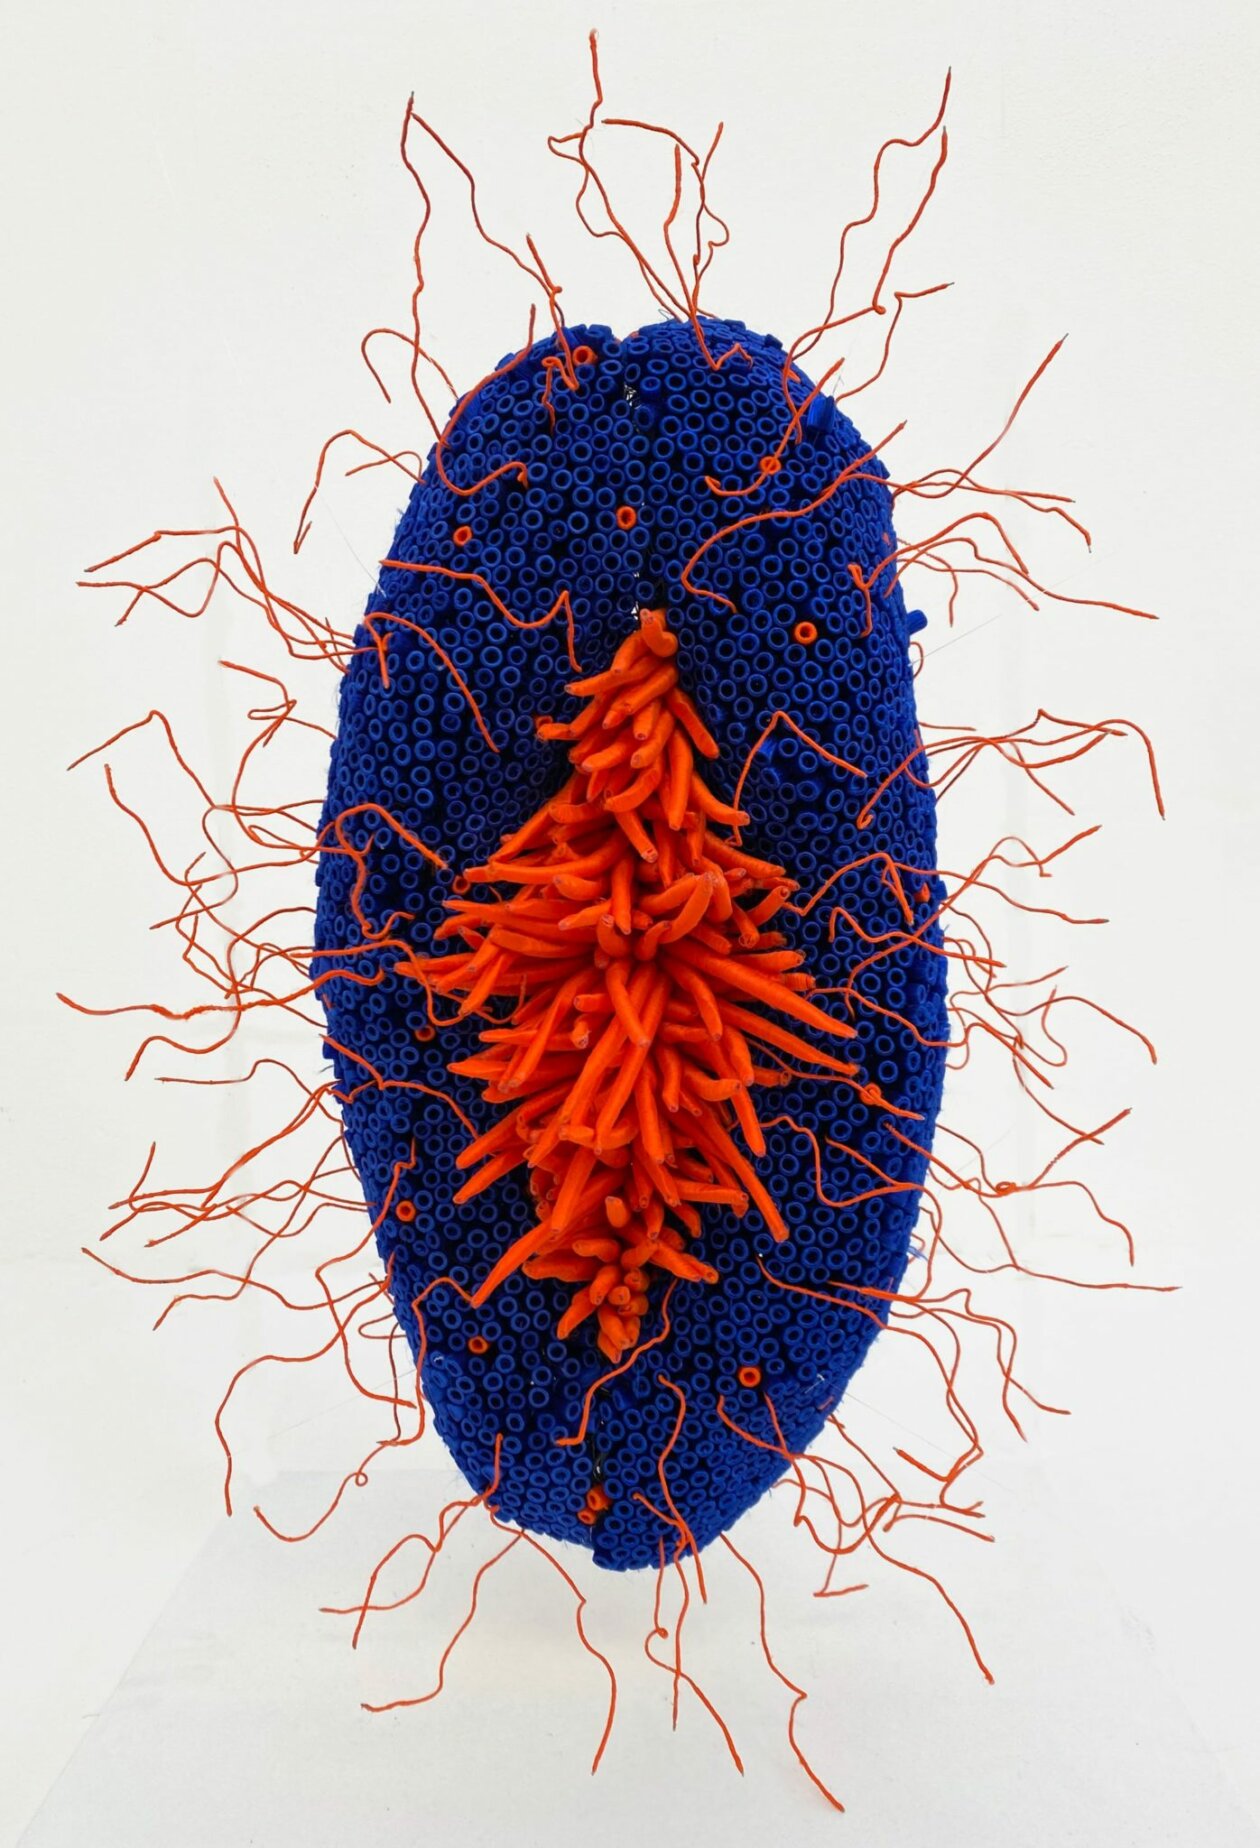 Coral Reefs, Cells, And Human Organs Made Out Of Plastic Bottle Caps And Embroideries By Ghizlane Sahli (8)